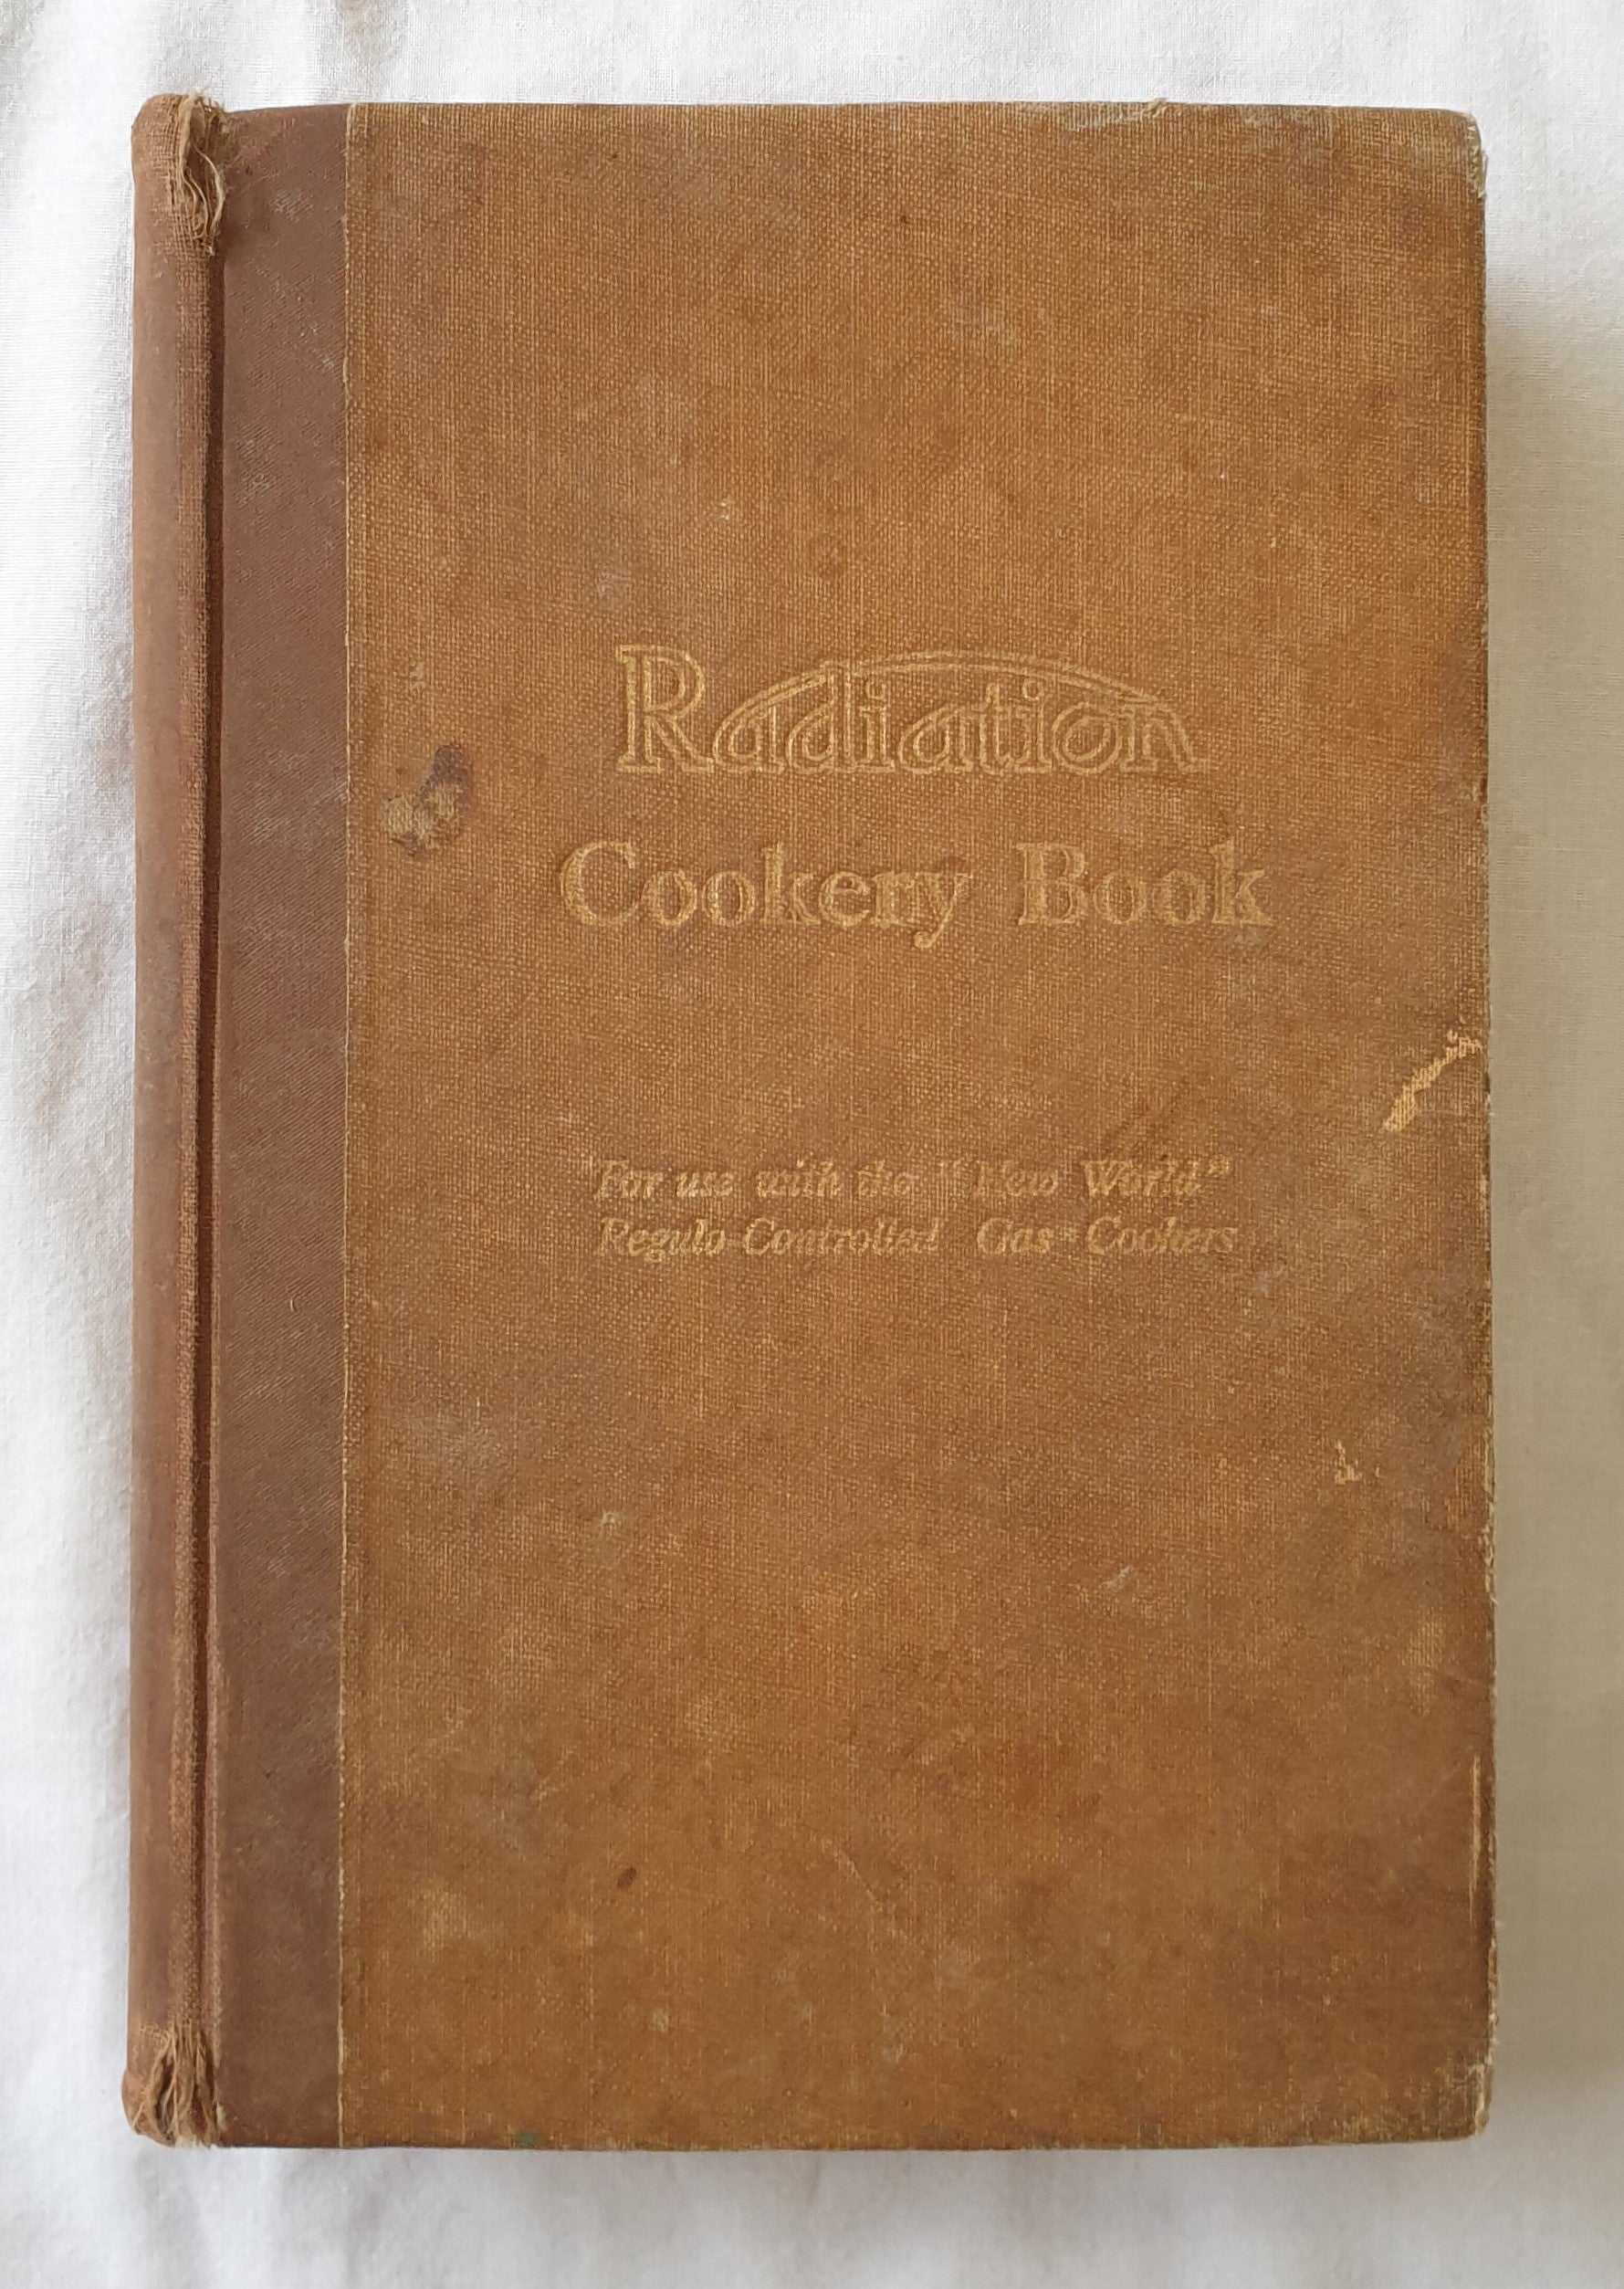 Radiation Cookery Book  A Selection of Proved Recipes for Use with Radiation “New-World” “Regulo” – Controlled Gas Cookers  by Radiation